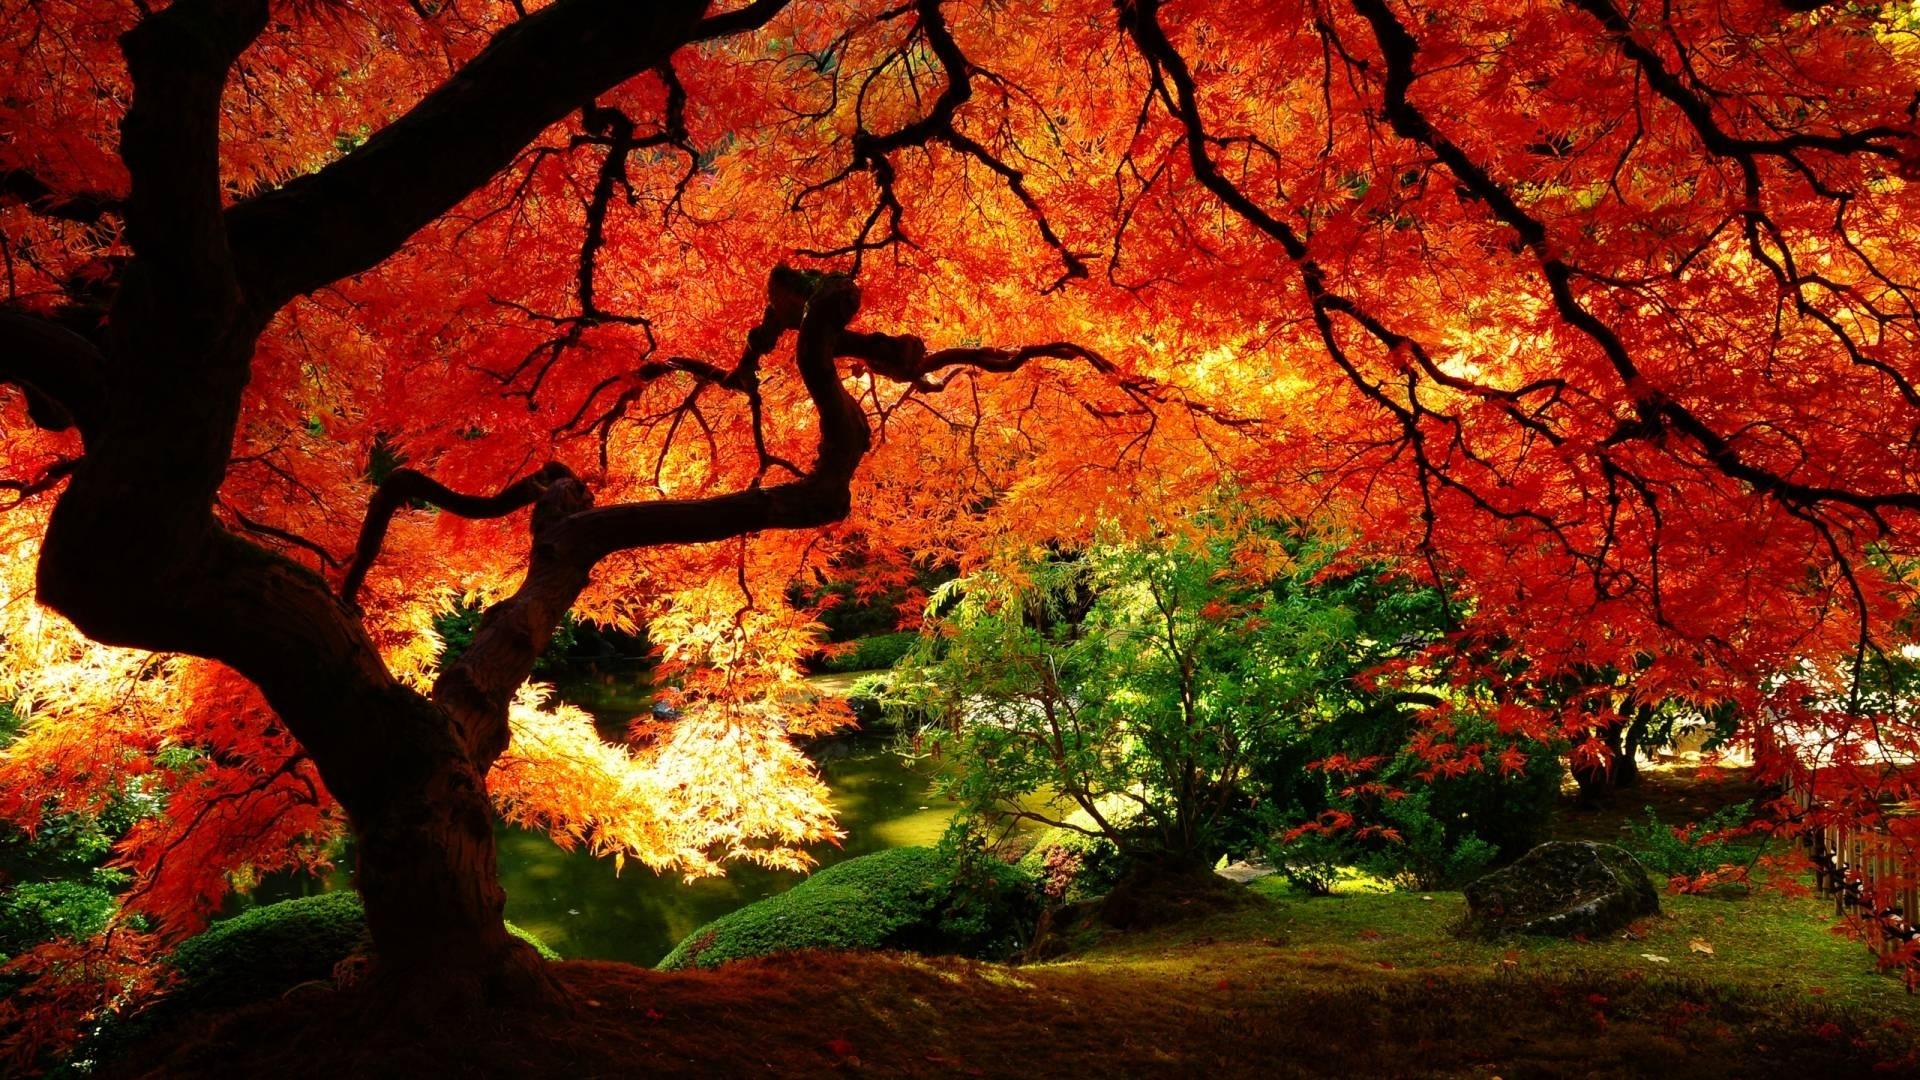 1920x1080 10 Top Fall Pictures For Desktop FULL HD 1080p For PC Desktop